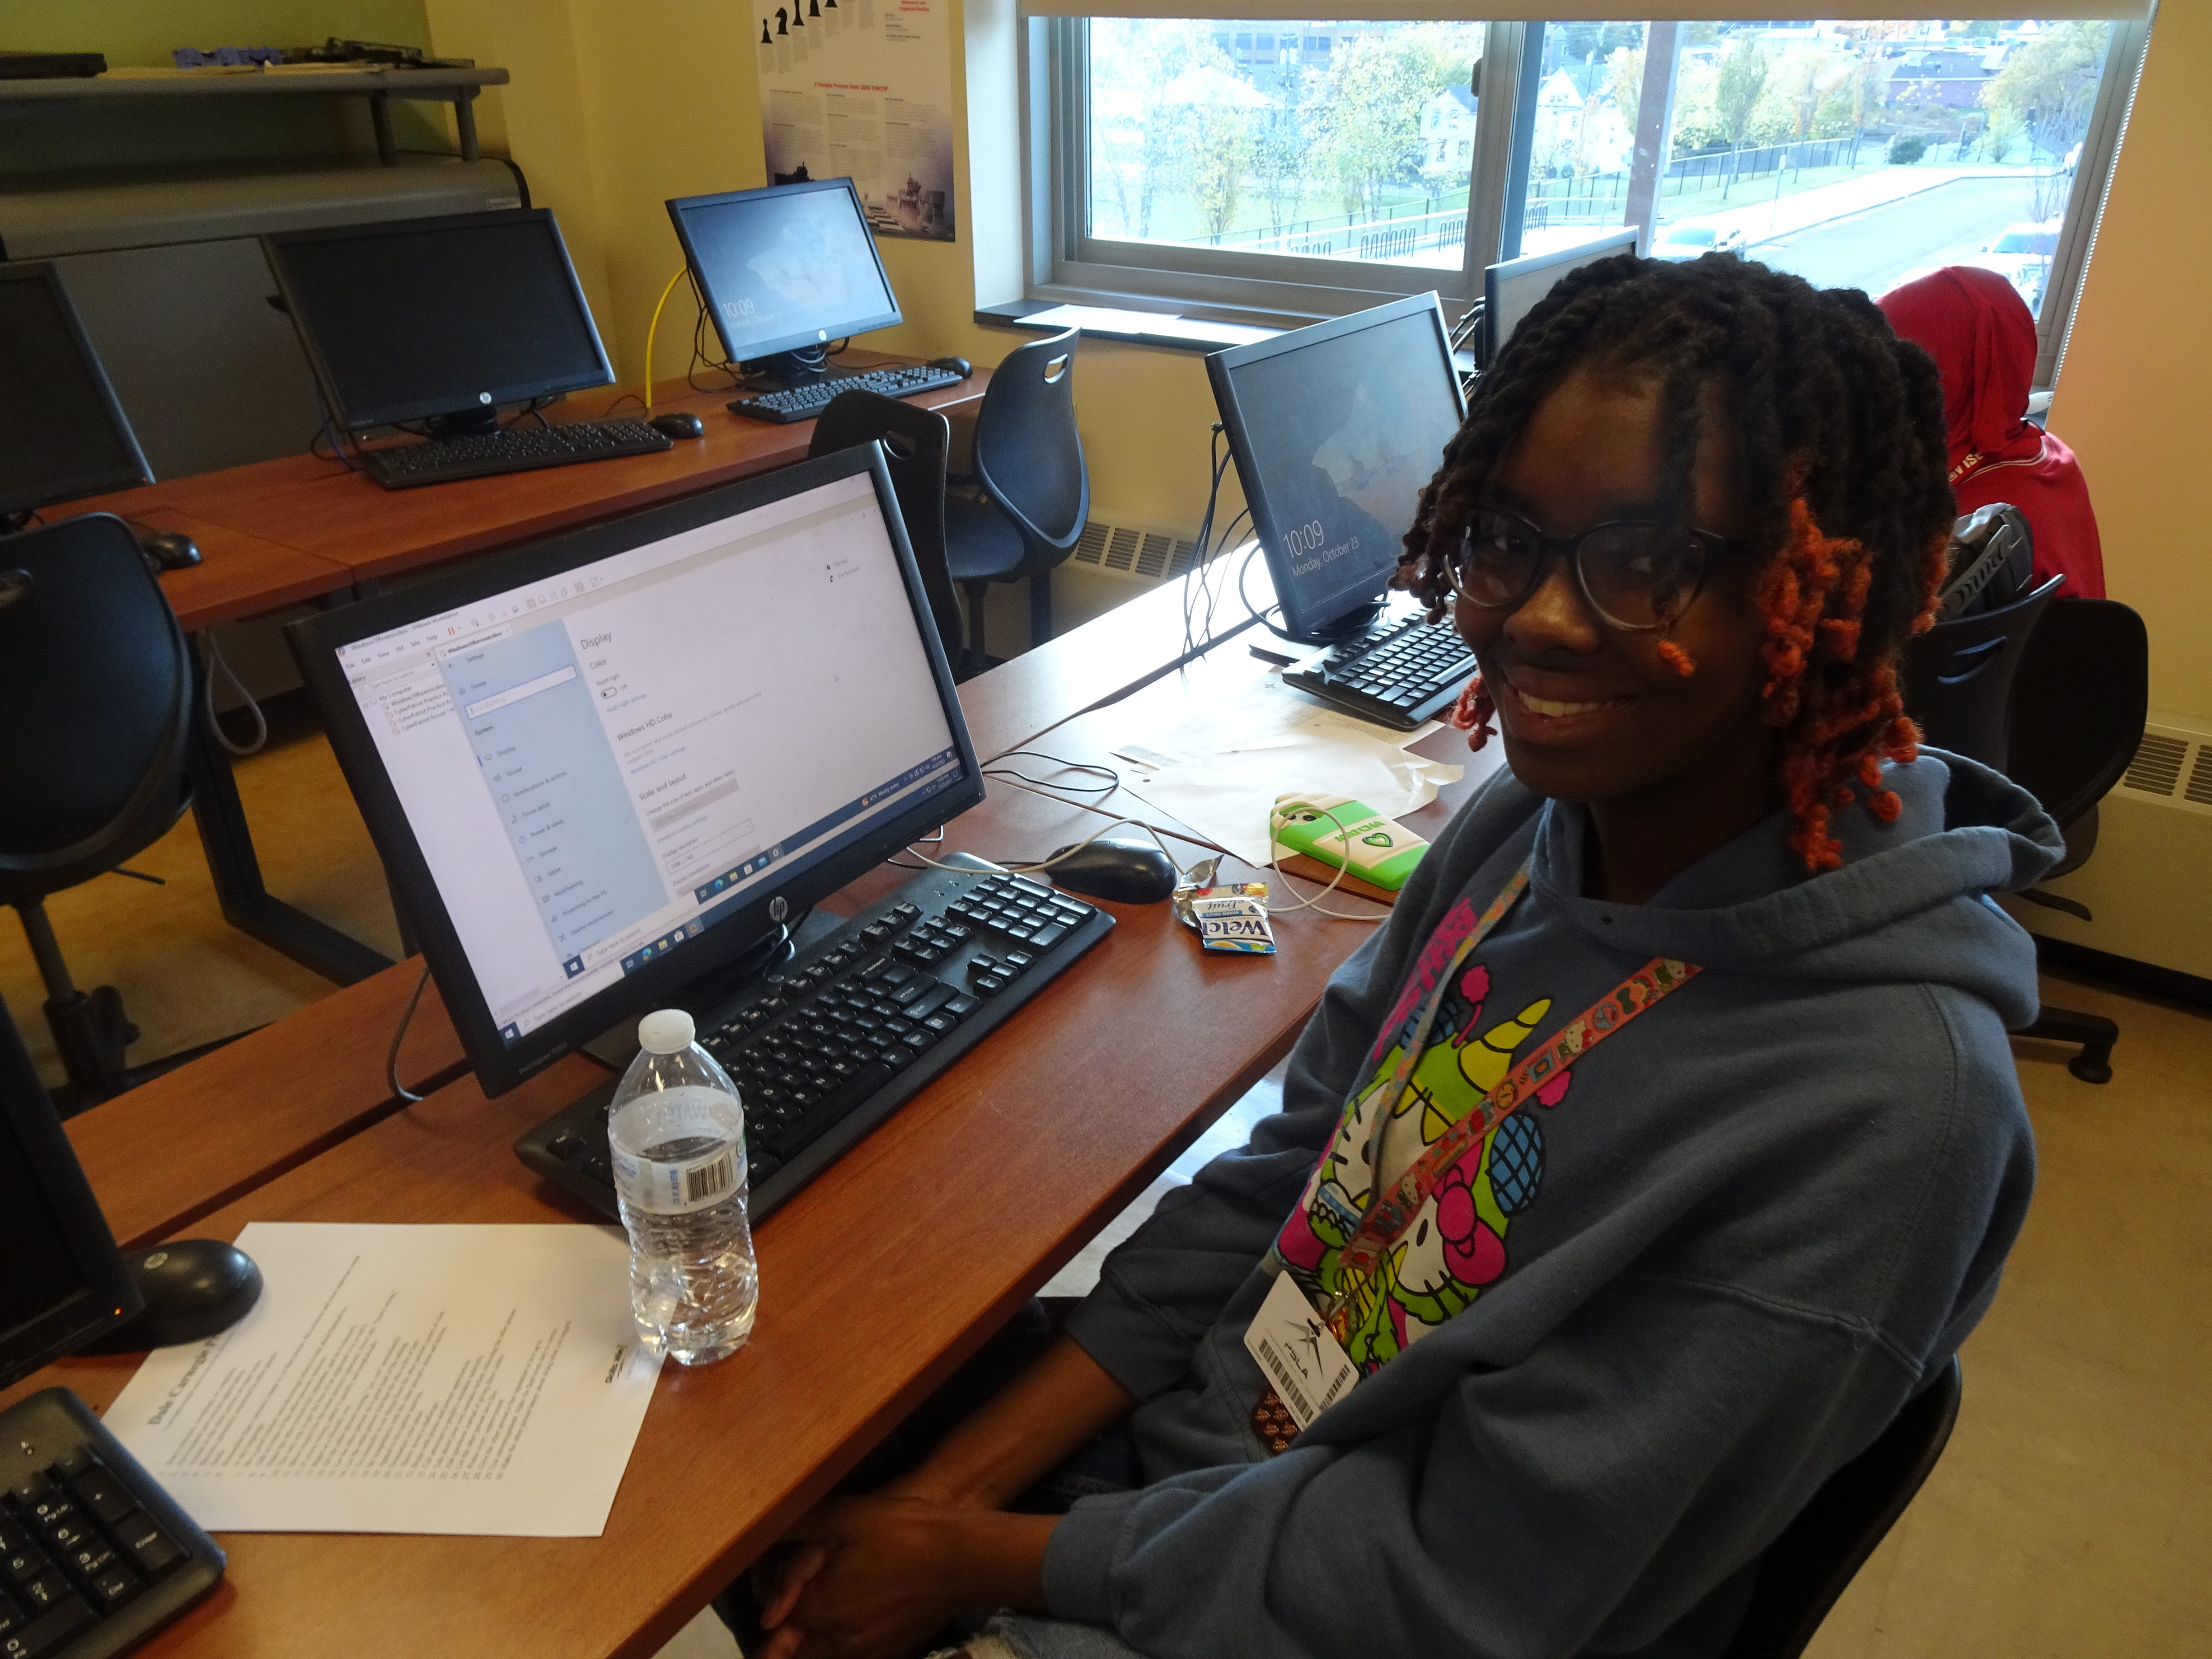 This is a photo of a PSLA at Fowler student sitting at a computer and smiling at the camera.